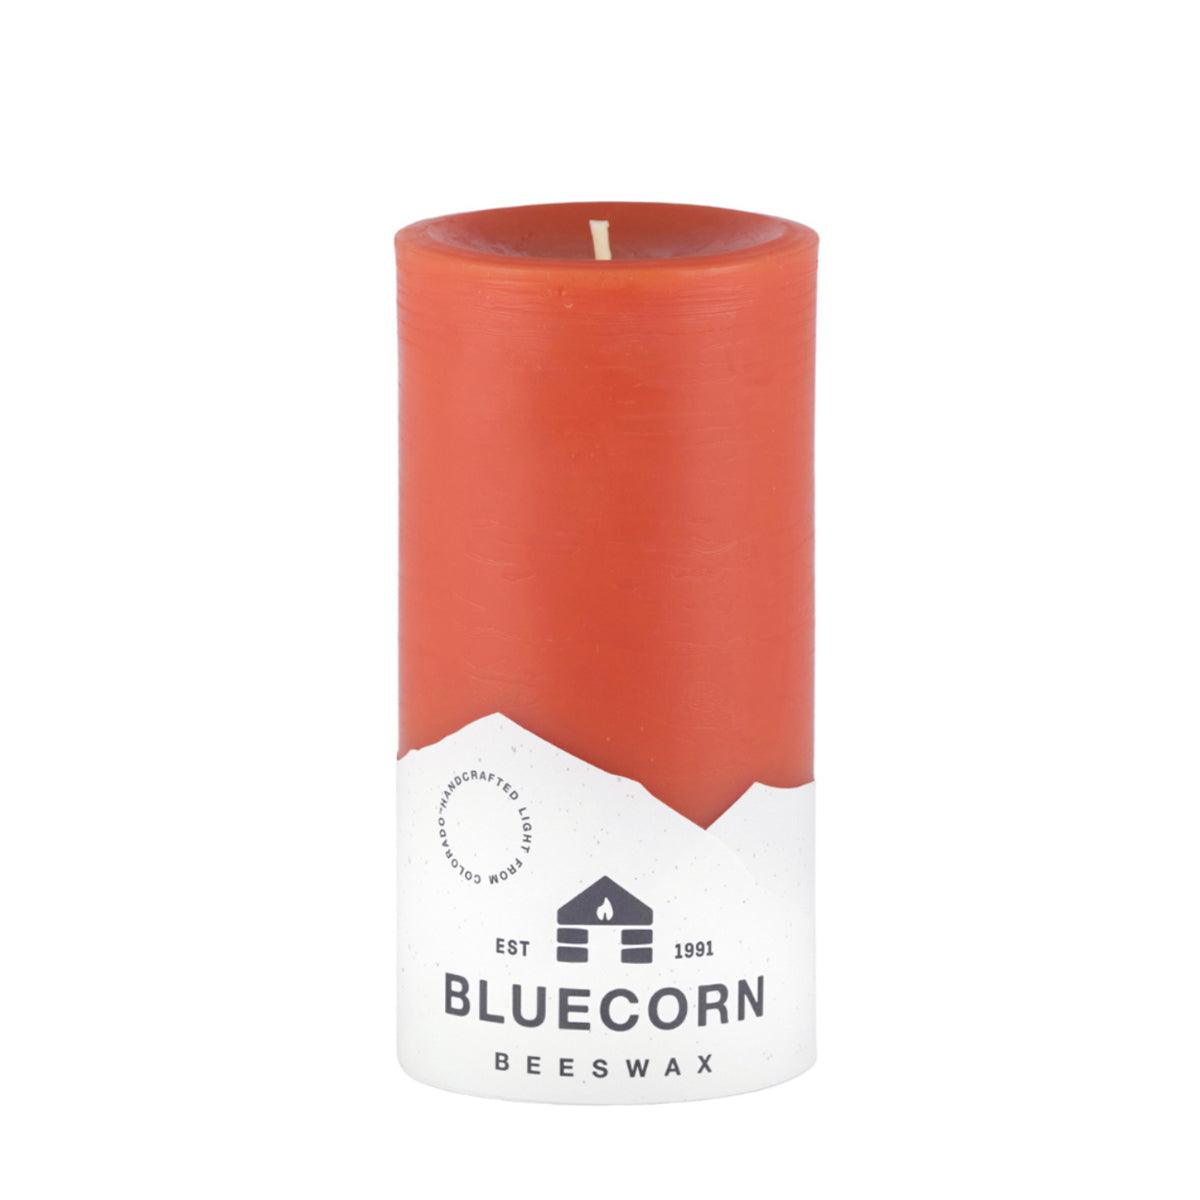 Bluecorn Beeswax 100% Pure Beeswax 3" x 6" Colored Pillar Candle. Burn Time: 90 hours. Made with 100% Pure Beeswax, wax is Apricot in color. Made with 100% pure cotton wick, no lead and paraffin free. Clean burning and non-toxic. Features Bluecorn Beeswax label printed on 100% recycled paper. Clearance items might have an odd blemish or air bubble, but will still burn beautifully. 